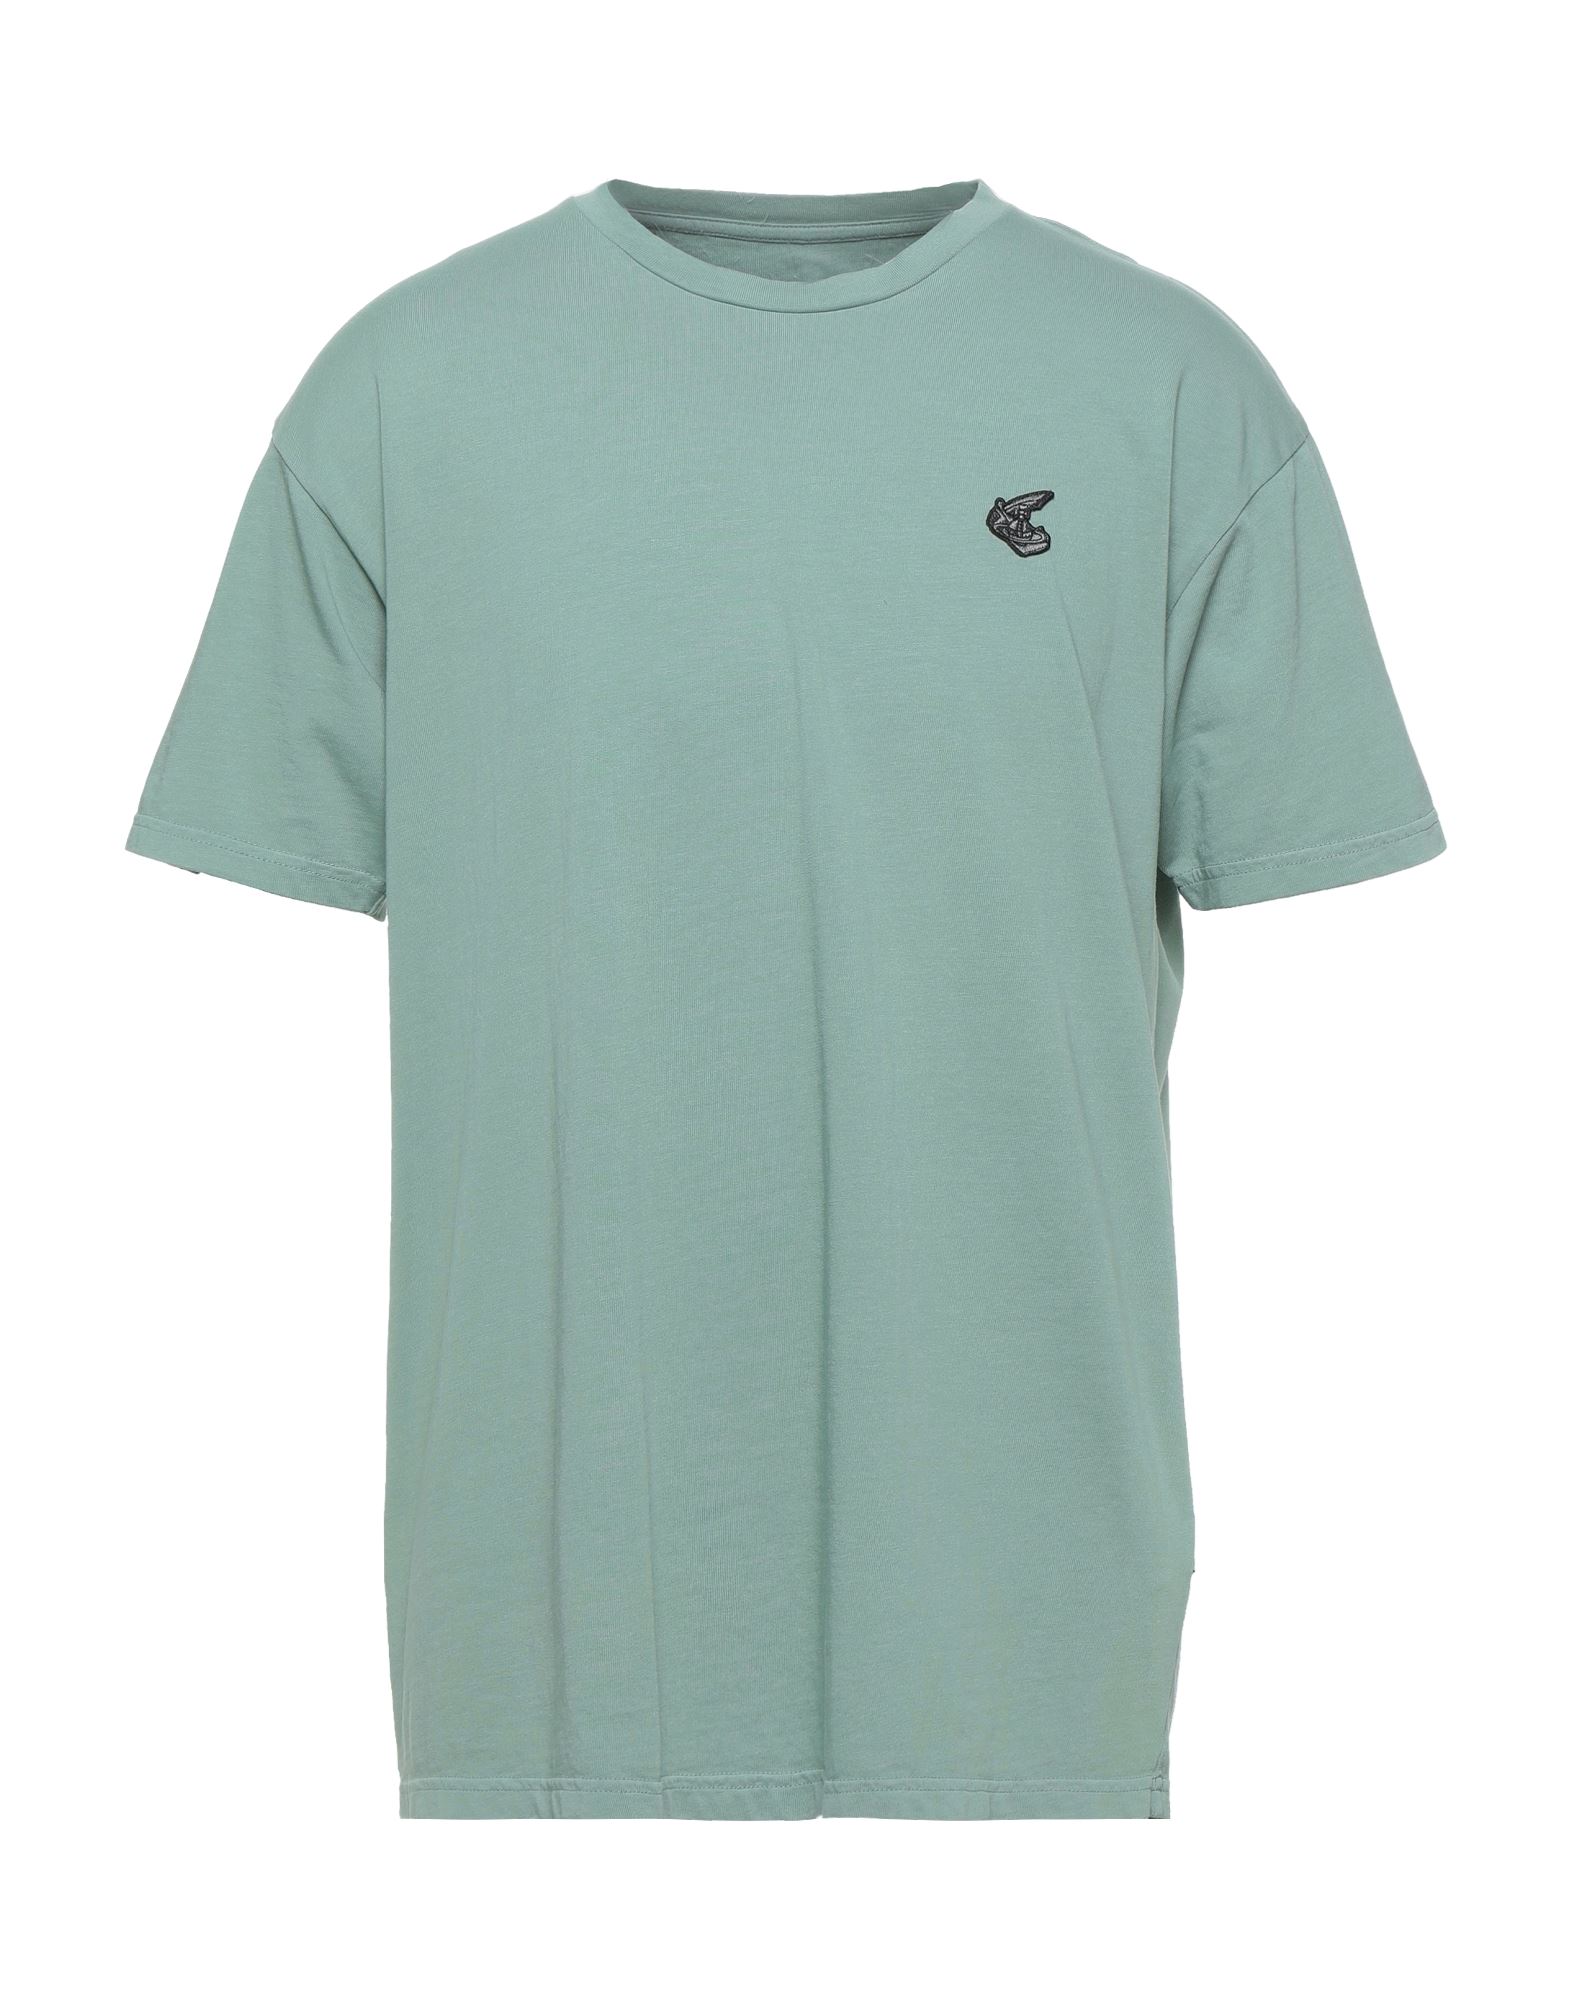 Vivienne Westwood Anglomania T-shirts In Sage Green